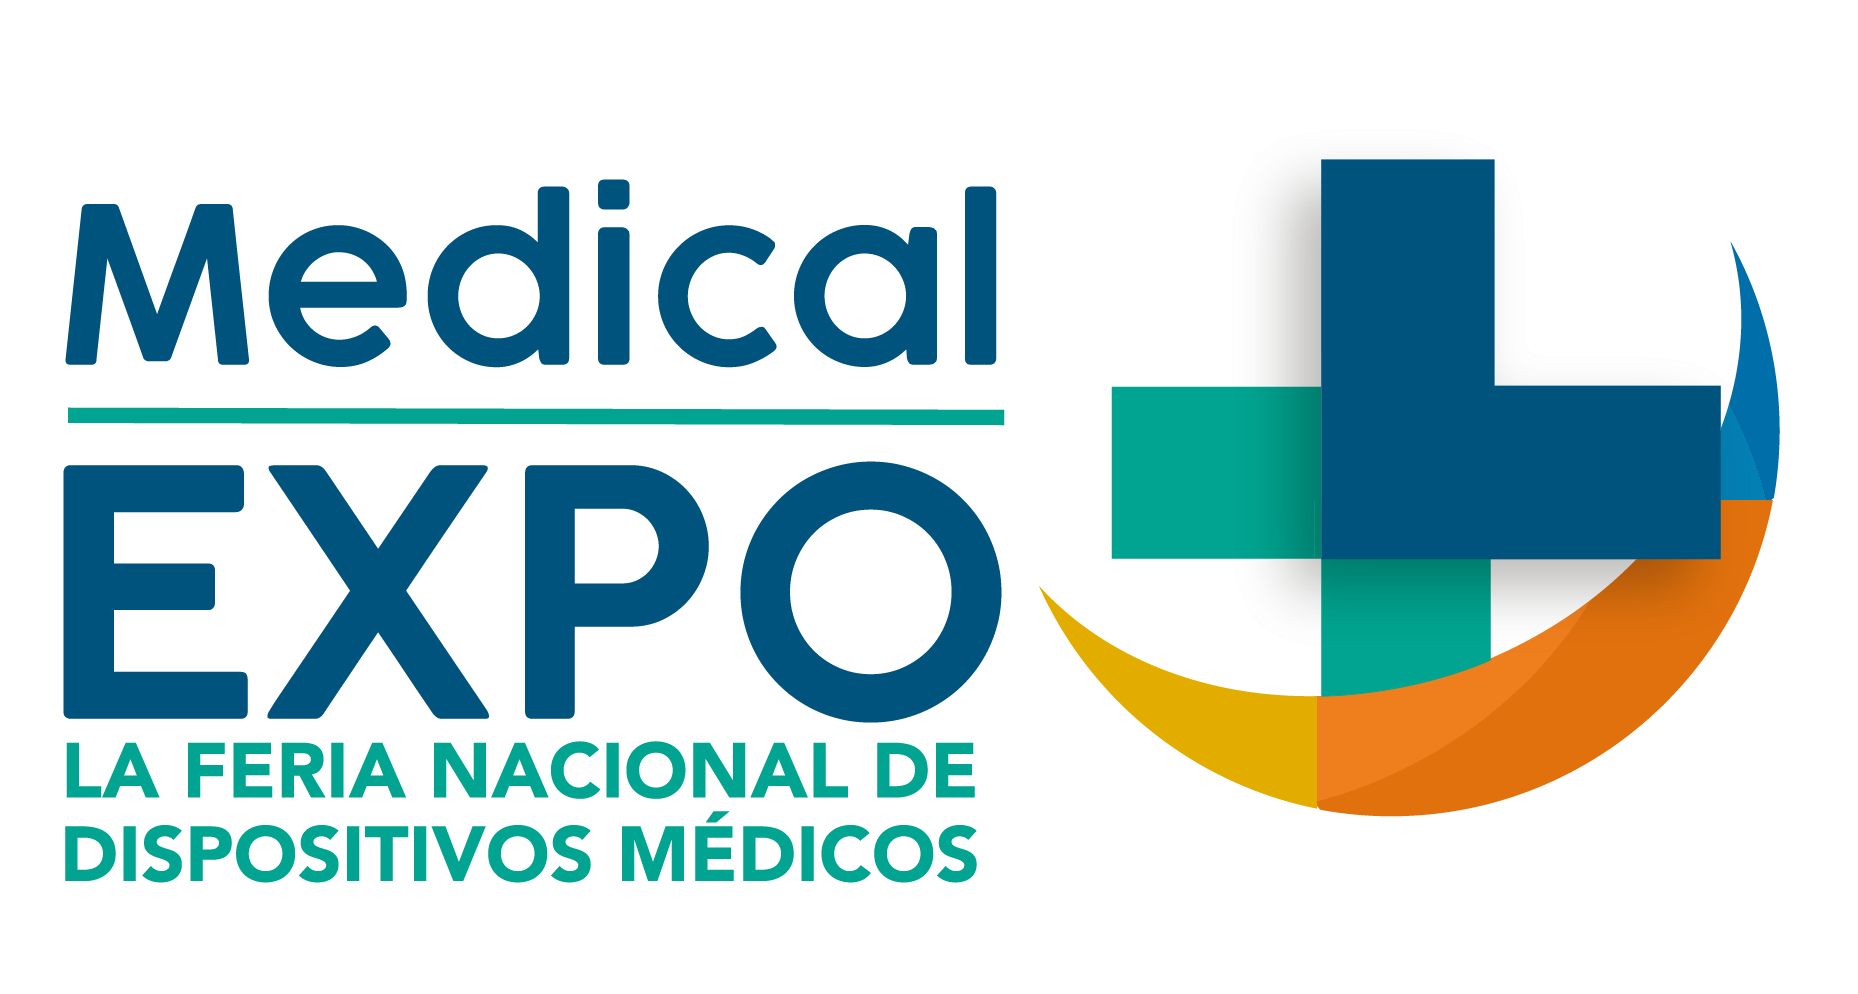 Medical Expo